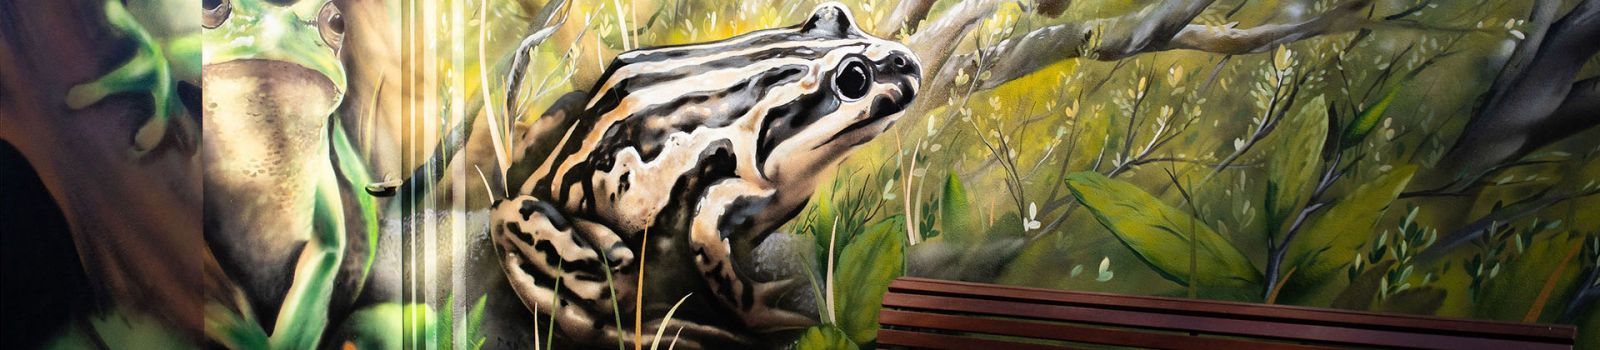 Image of frog painting created by local Port Stephens artist banner image